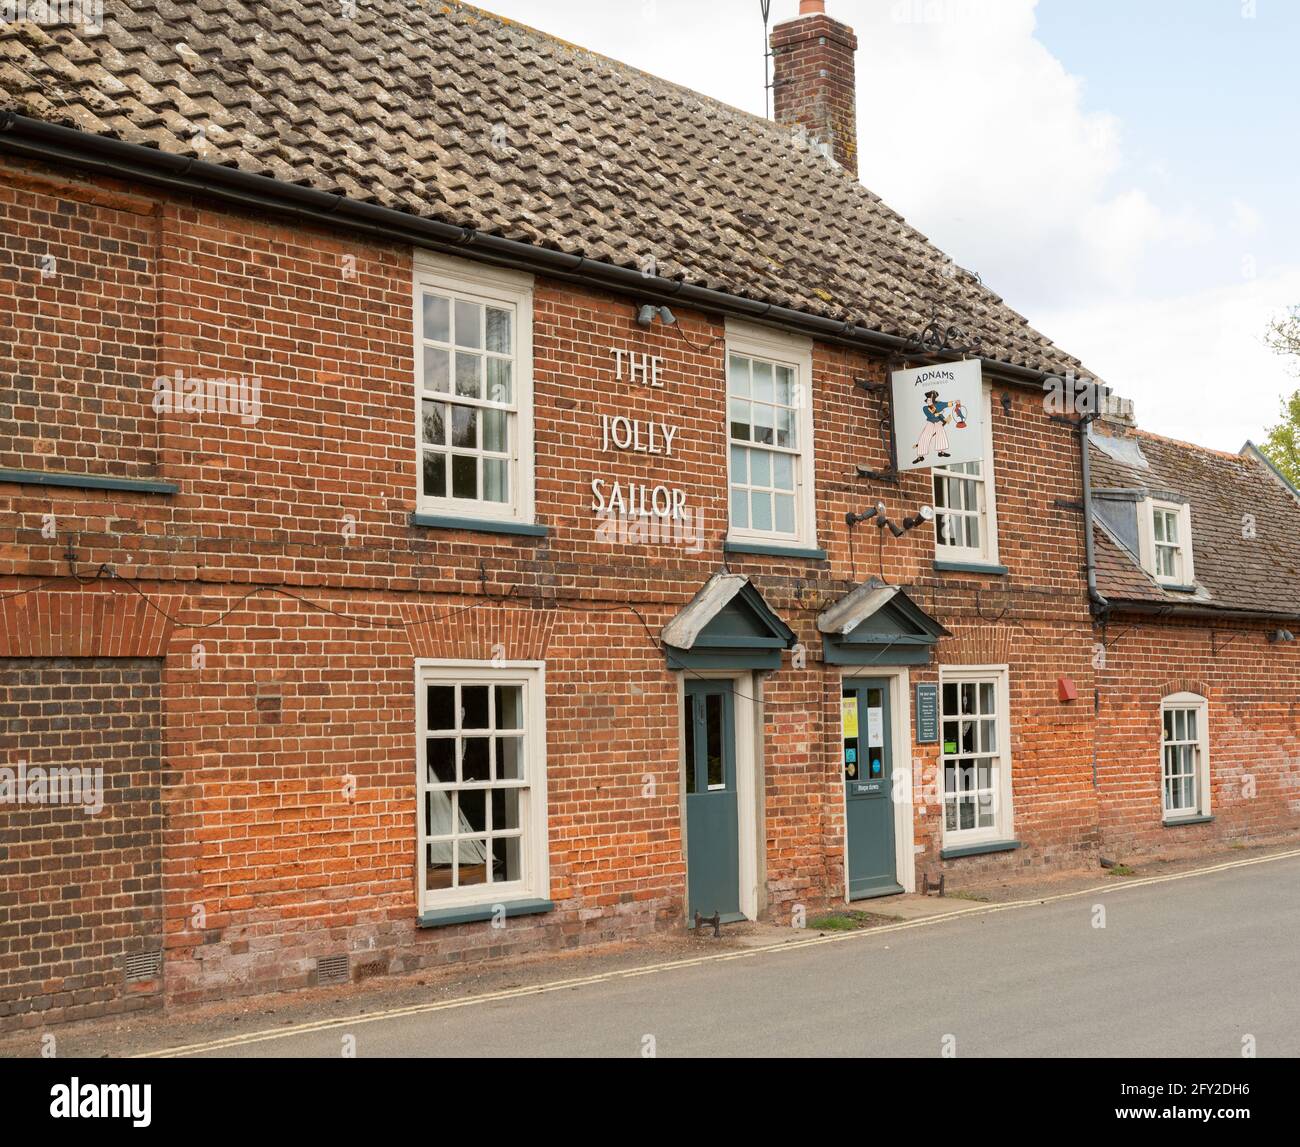 Exterior of the Jolly Sailor public house in Orford, Suffolk. UK Stock Photo